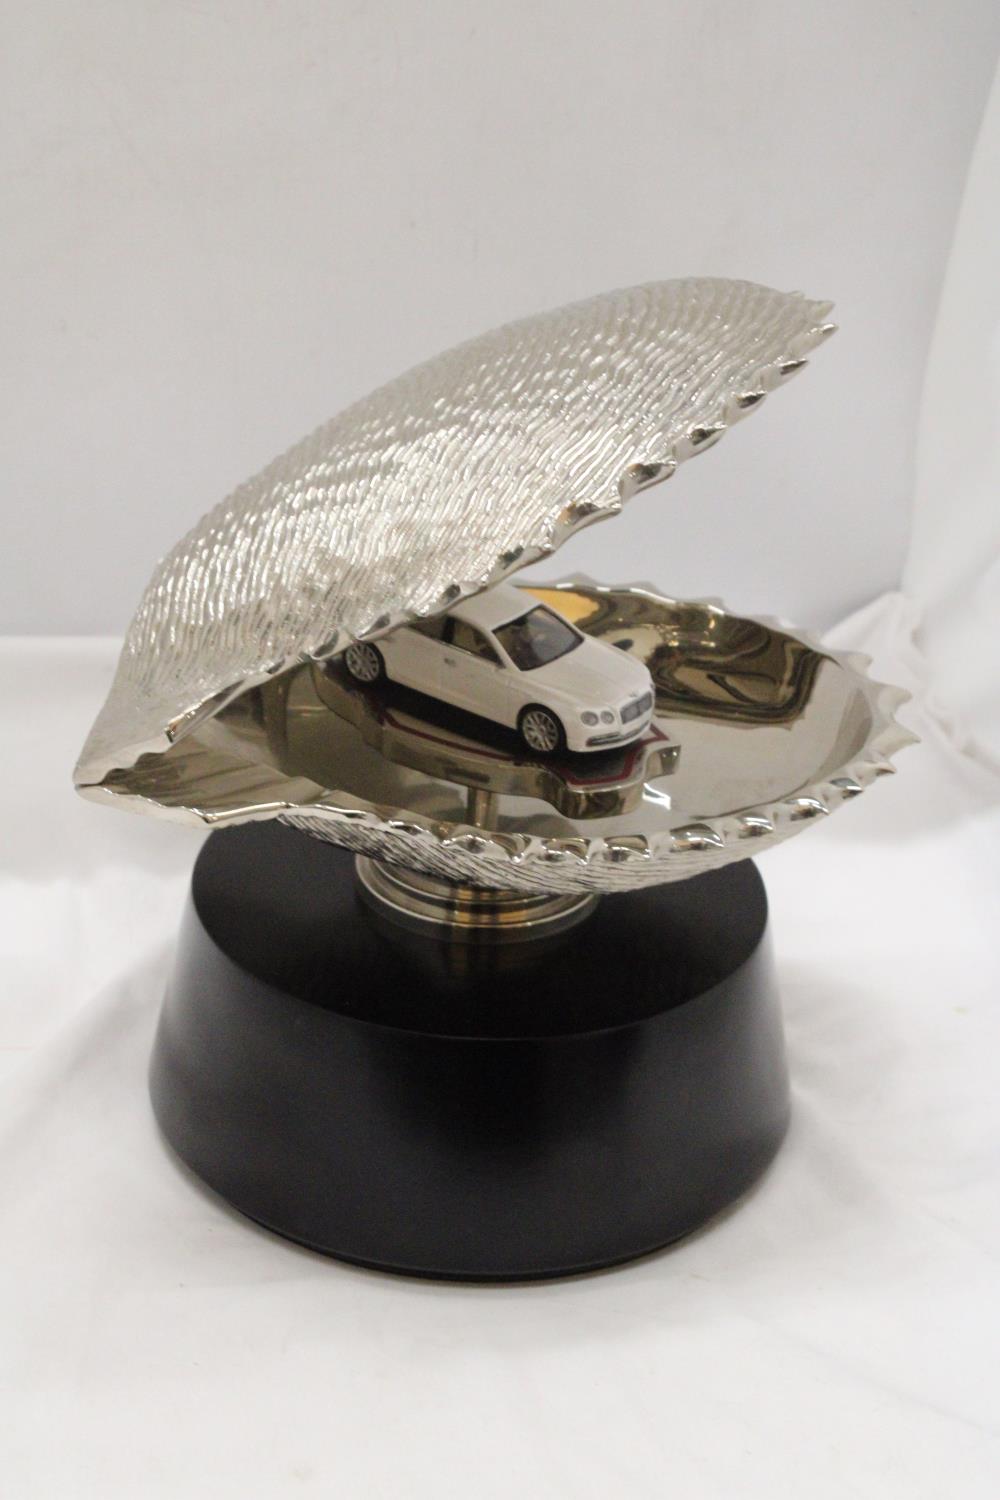 A LARGE CHROME OYSTER SHELL, ENCLOSING A BENTLEY CAR, ON A BASE, HEIGHT 30CM, DIAMETER APPROX 24CM - Image 4 of 6